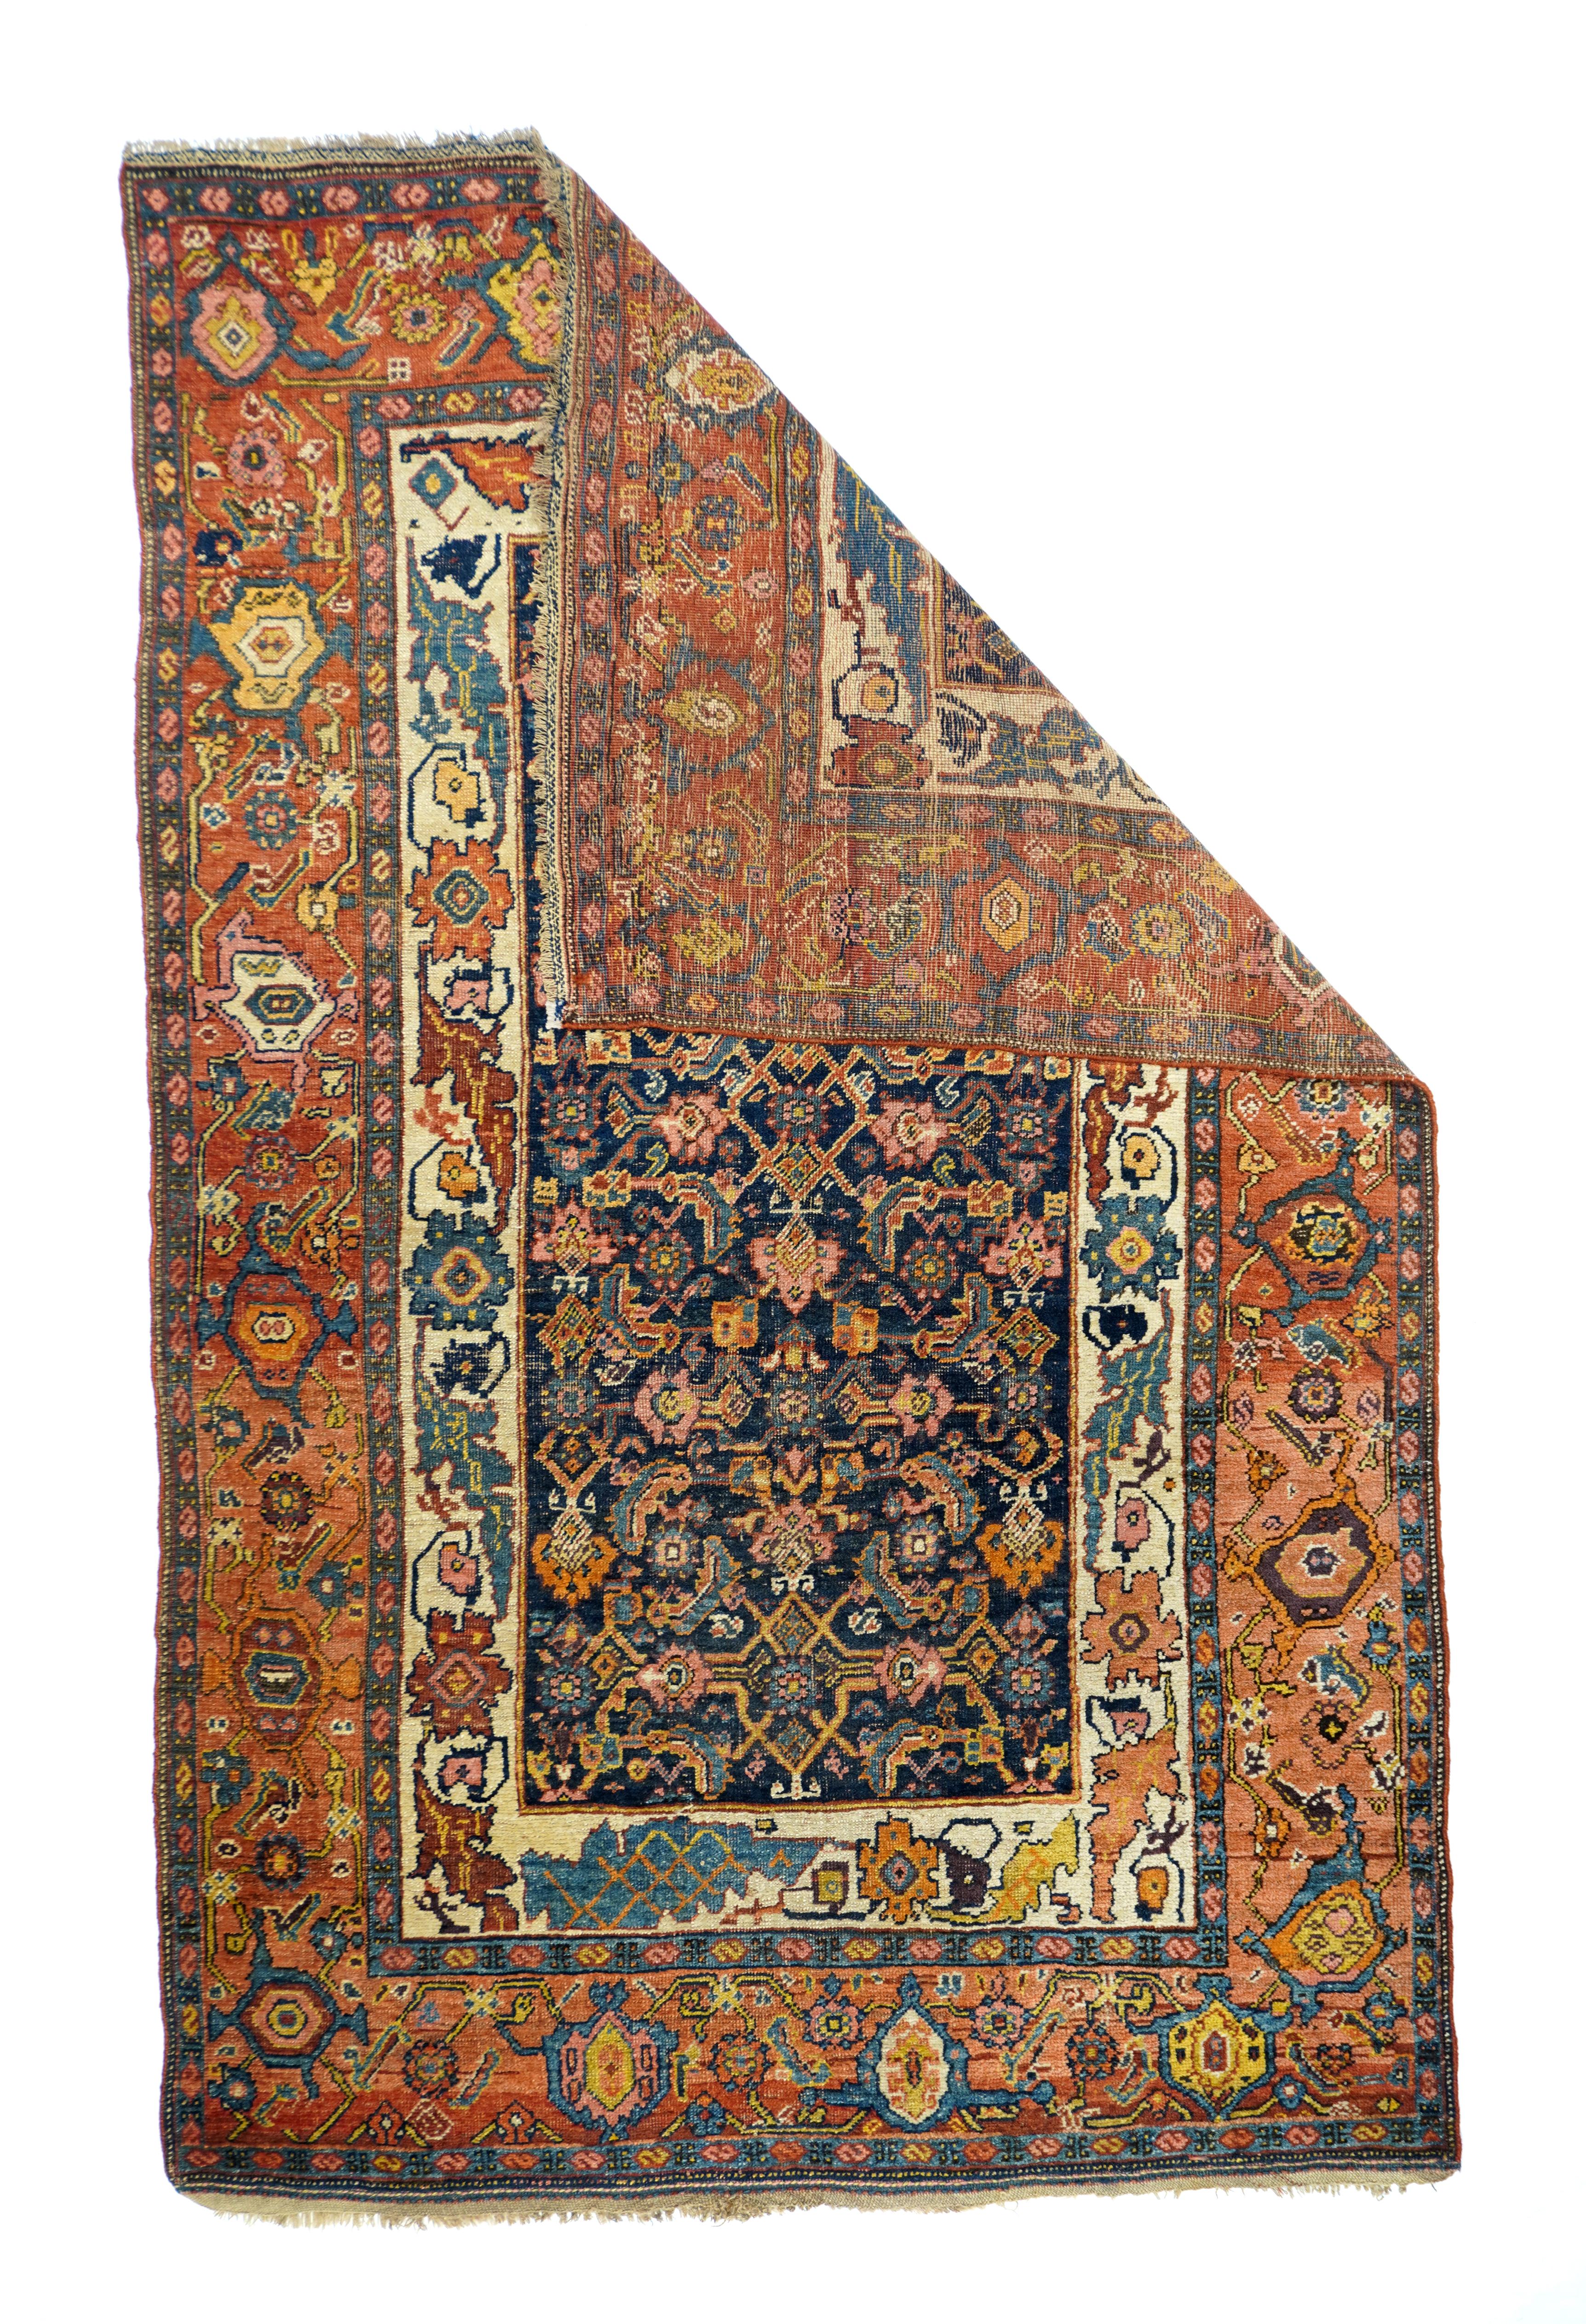 Antique Bidjar Rug 4'7'' x 7'3''. Wool foundations, as here, characterize the extremely robust weaving of the Kurds in and around Bidjar town, and the most popular design/colour combination is the Herati on navy blue. The inner ivory border shows